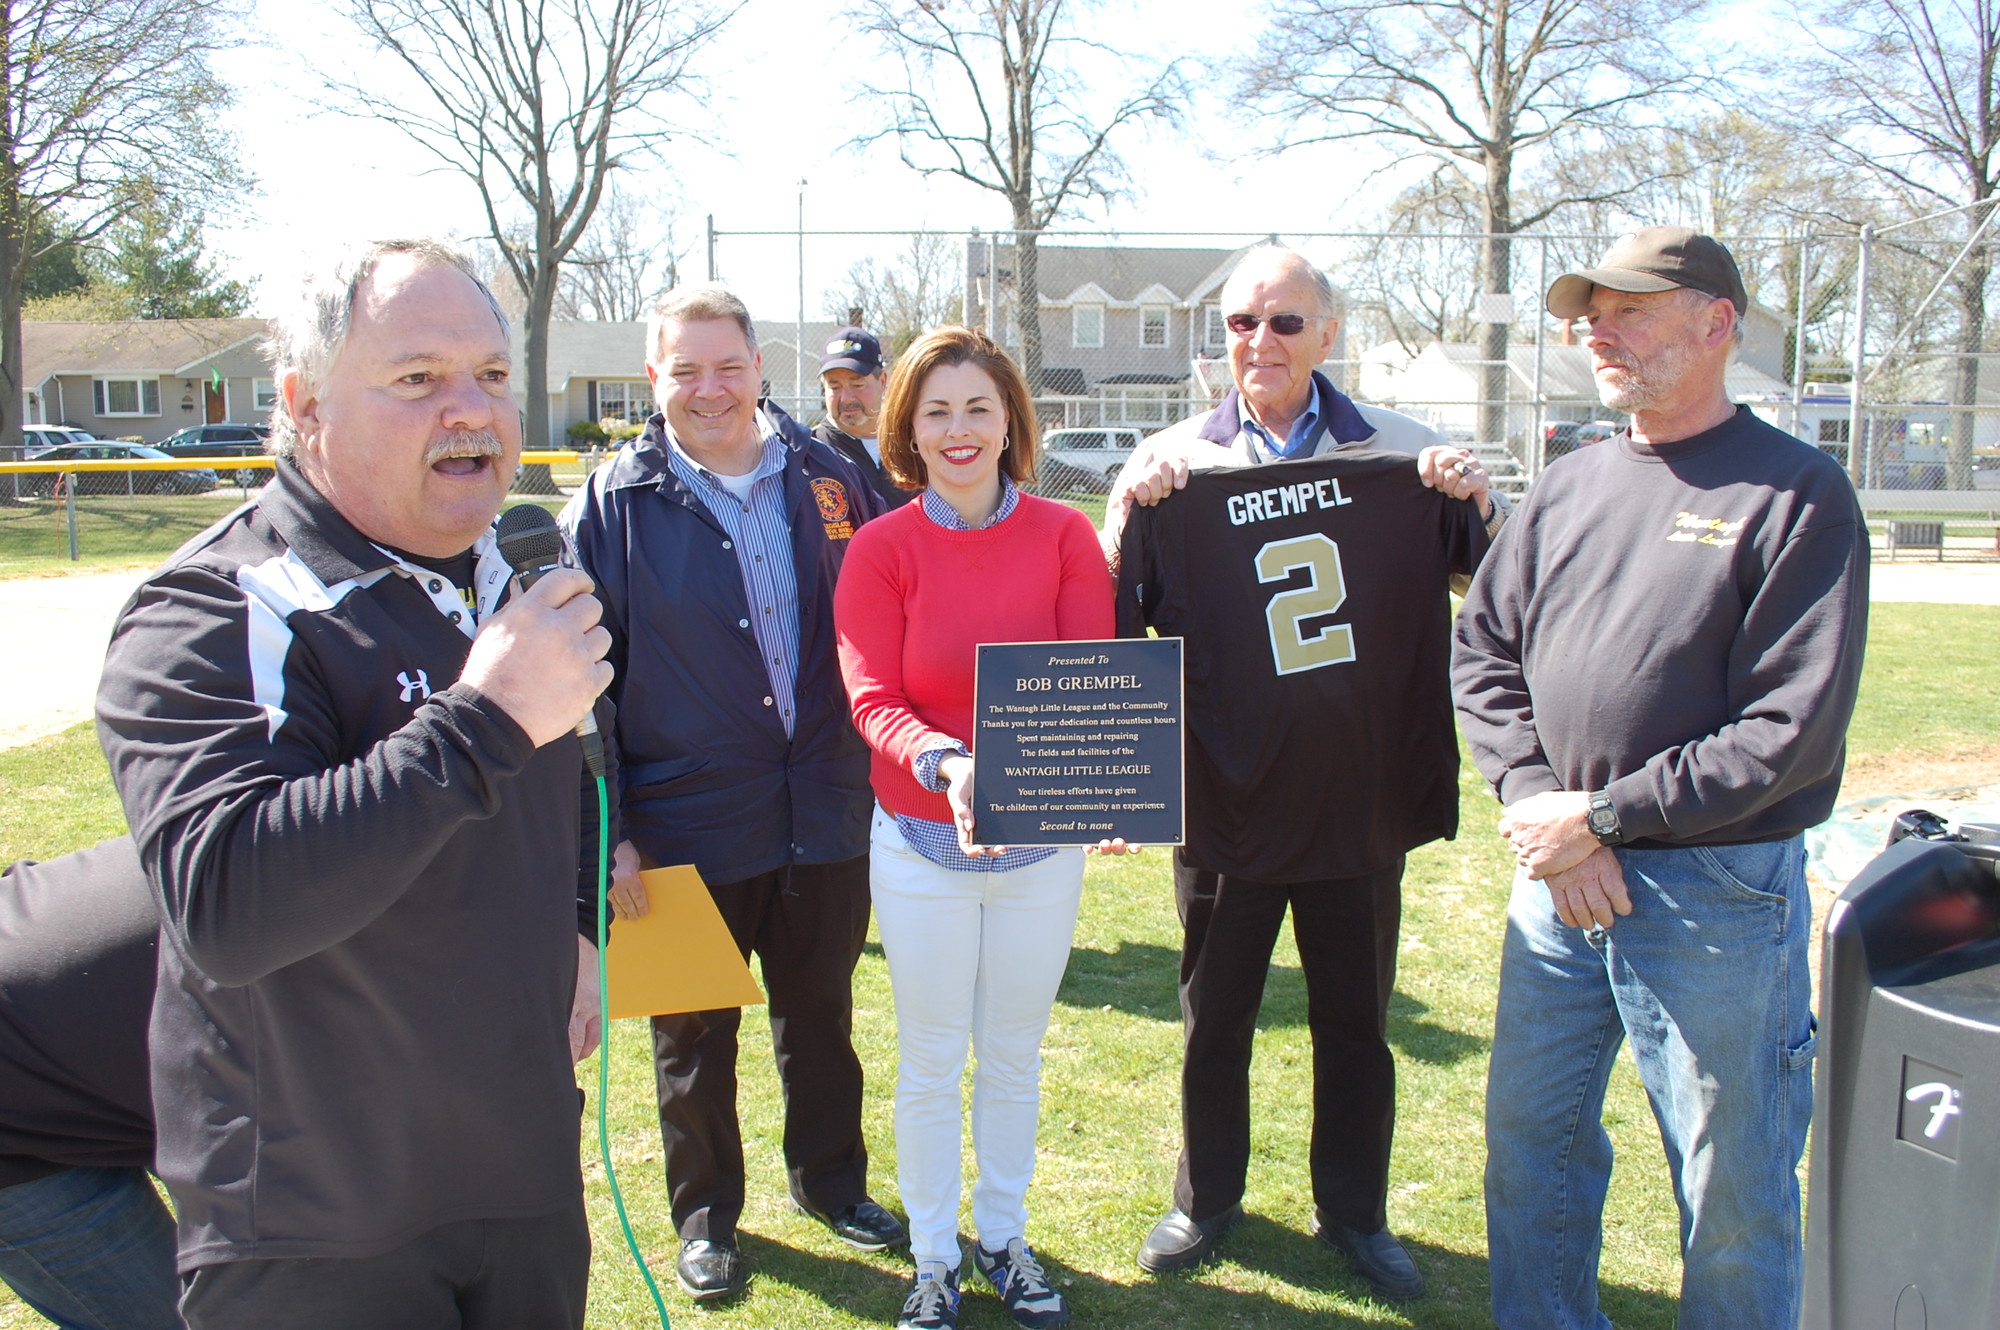 Ed Ciminielli, left, spoke about Bob Grempel, at right, who was honored for his work maintaining the Wantagh Little League’s fields. Also pictured are County Legislator Steve Rhoads, Town Councilwoman Erin King Sweeney and State Assemblyman Devid McDonough.